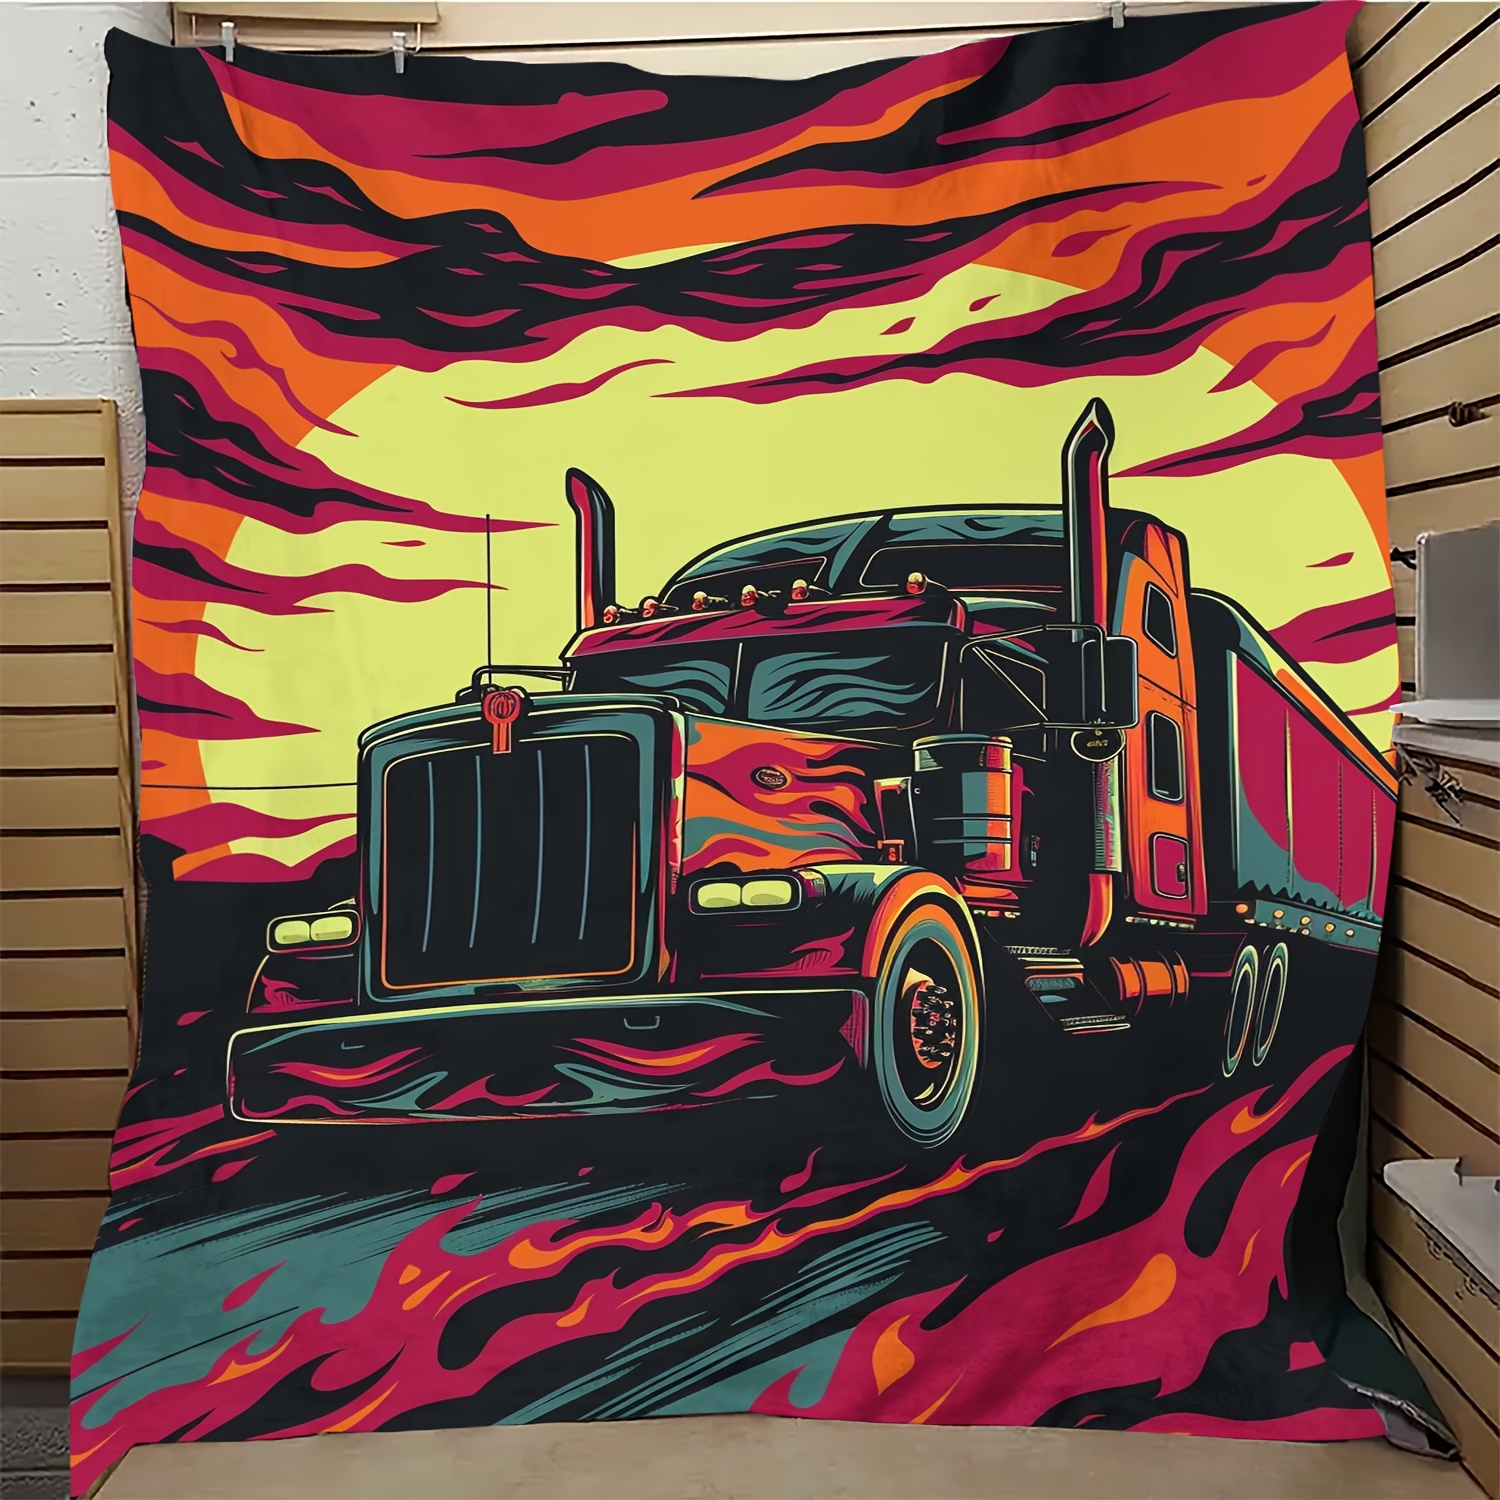 

Style Sunset Truck Design Flannel Fleece Throw Blanket, Soft Cozy Polyester All-season Knitted Movie Theme Gift Blanket With Vibrant Flames Pattern - Versatile Home Decor For Couch, Bed